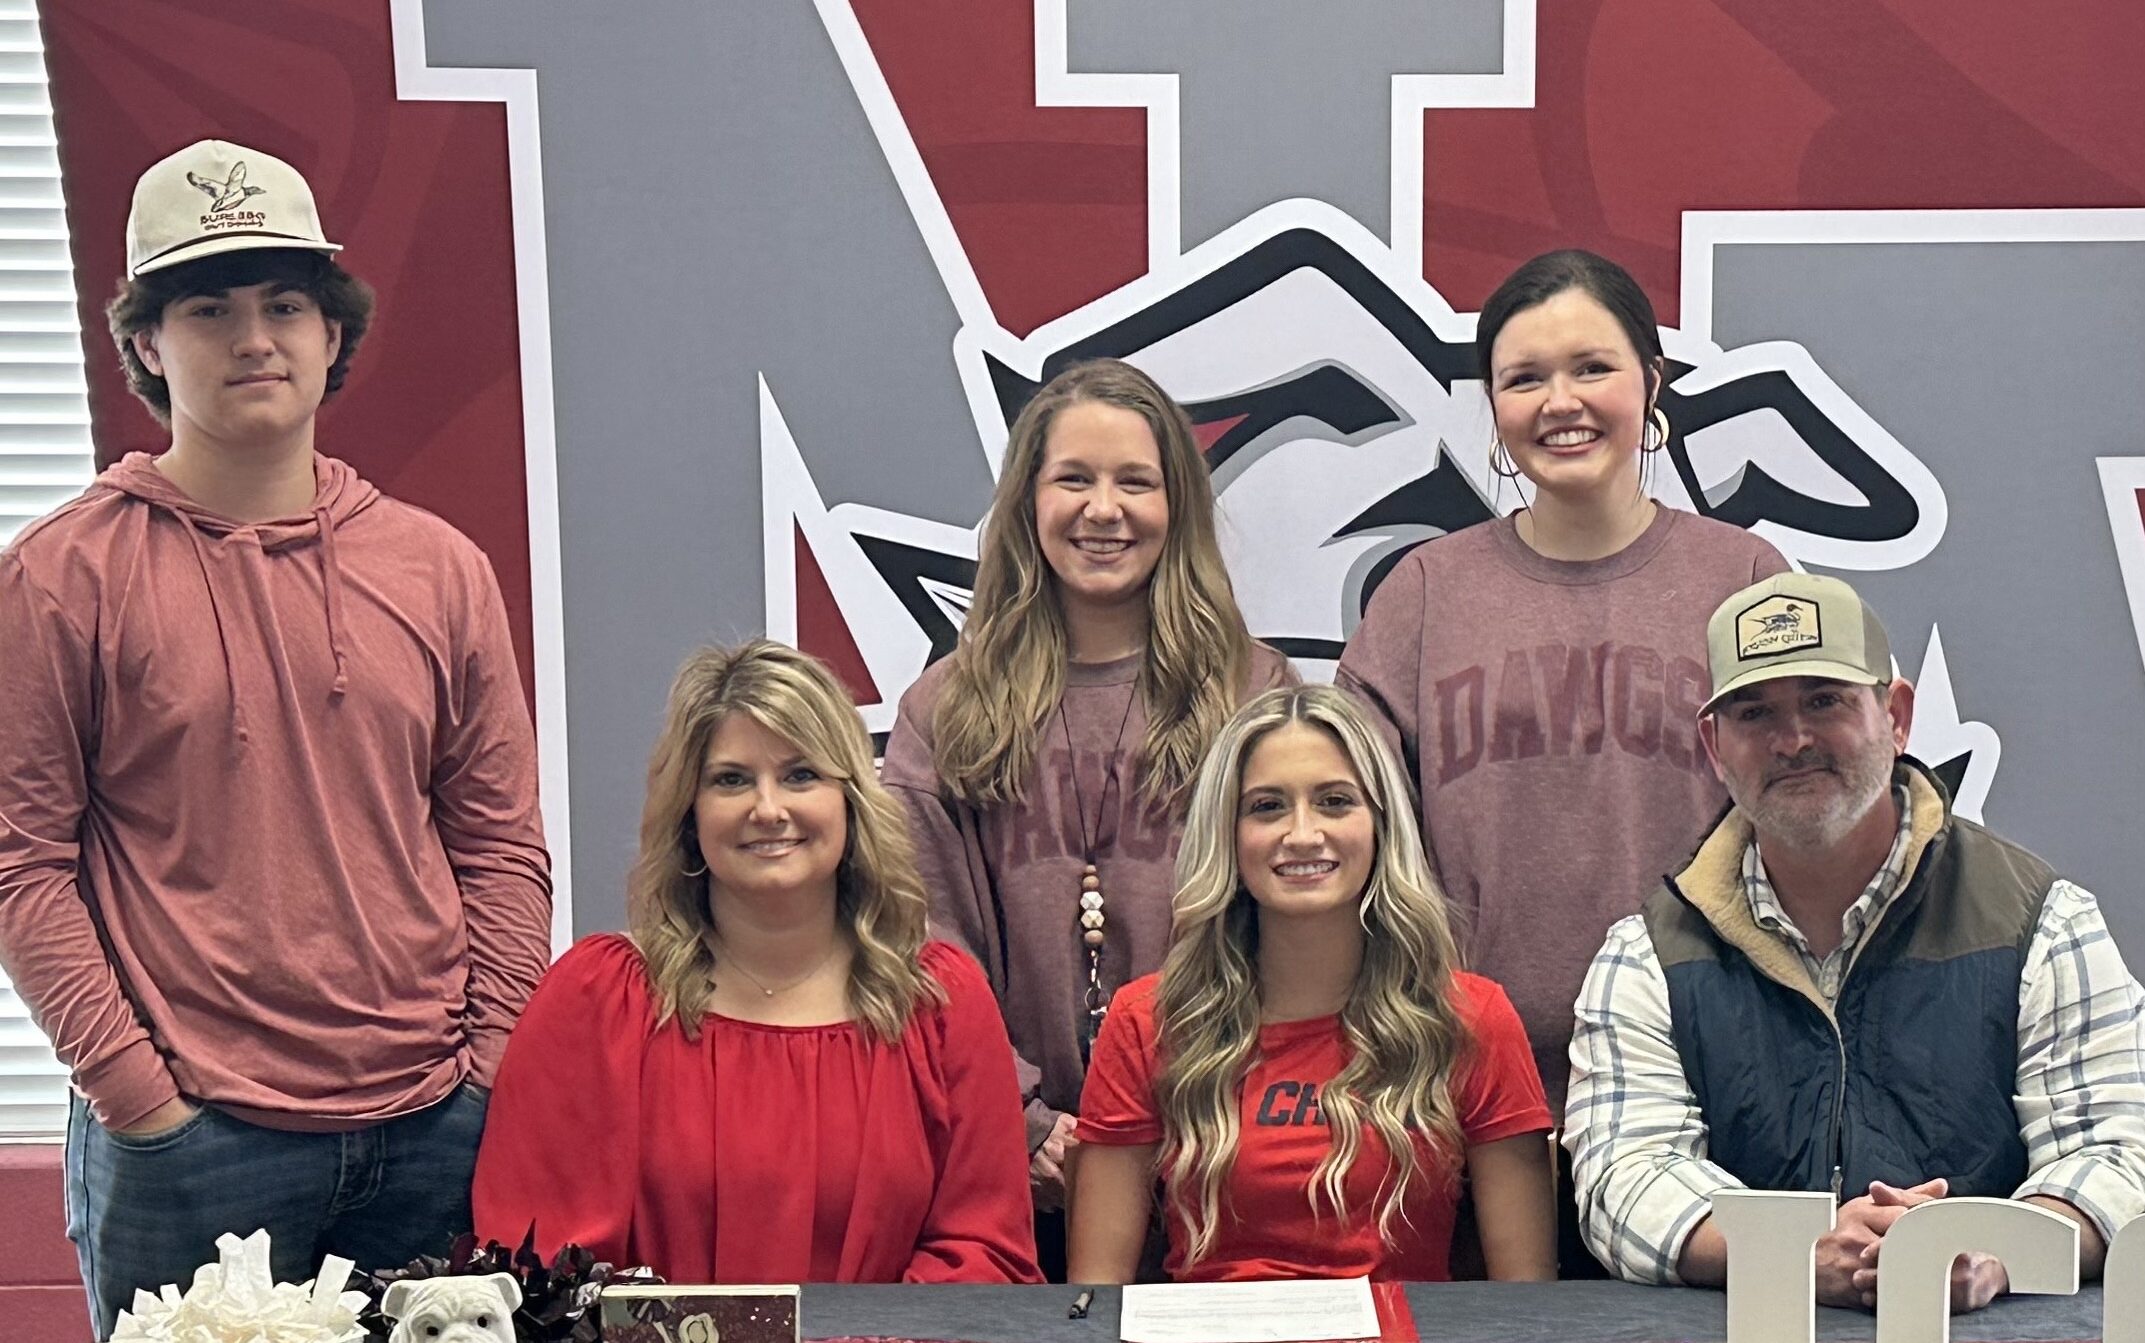 New Albany High School senior cheerleader Addi Owen was surrounded by friends and family as she signed with Itawamba Community College Cheer on Tuesday, February 20, 2024. Pictured are front row l-r: Eva Owen, Addi Owen, Brett Owen; back row l-r: Aden Owen, NAHS Cheer Coach Mary Scott Sanks, and NAHS Cheer Coach Allie Pierce.